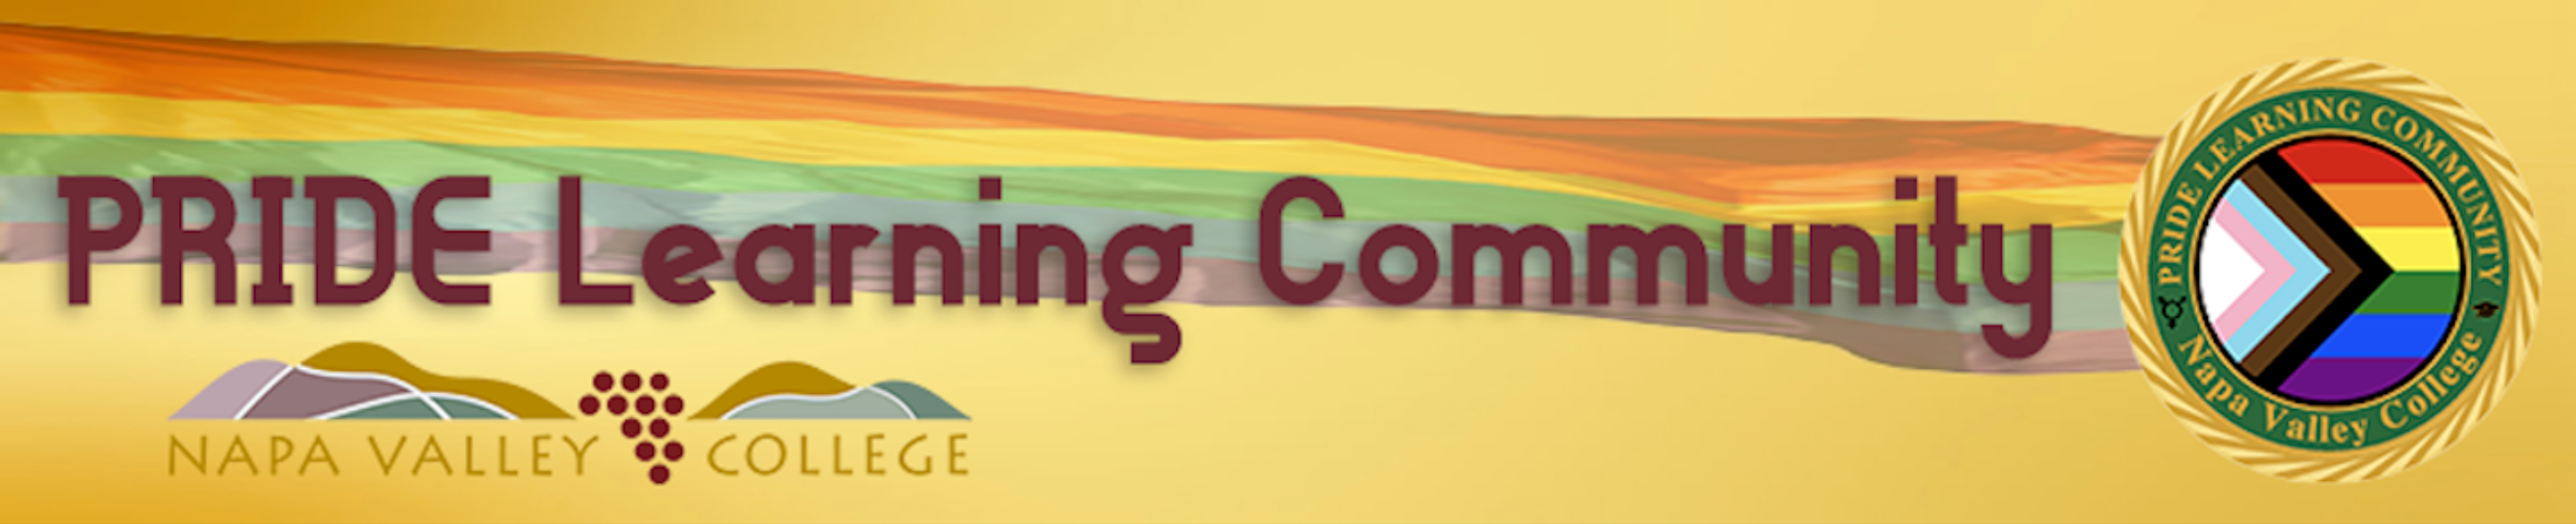 NVC Pride Learning Community